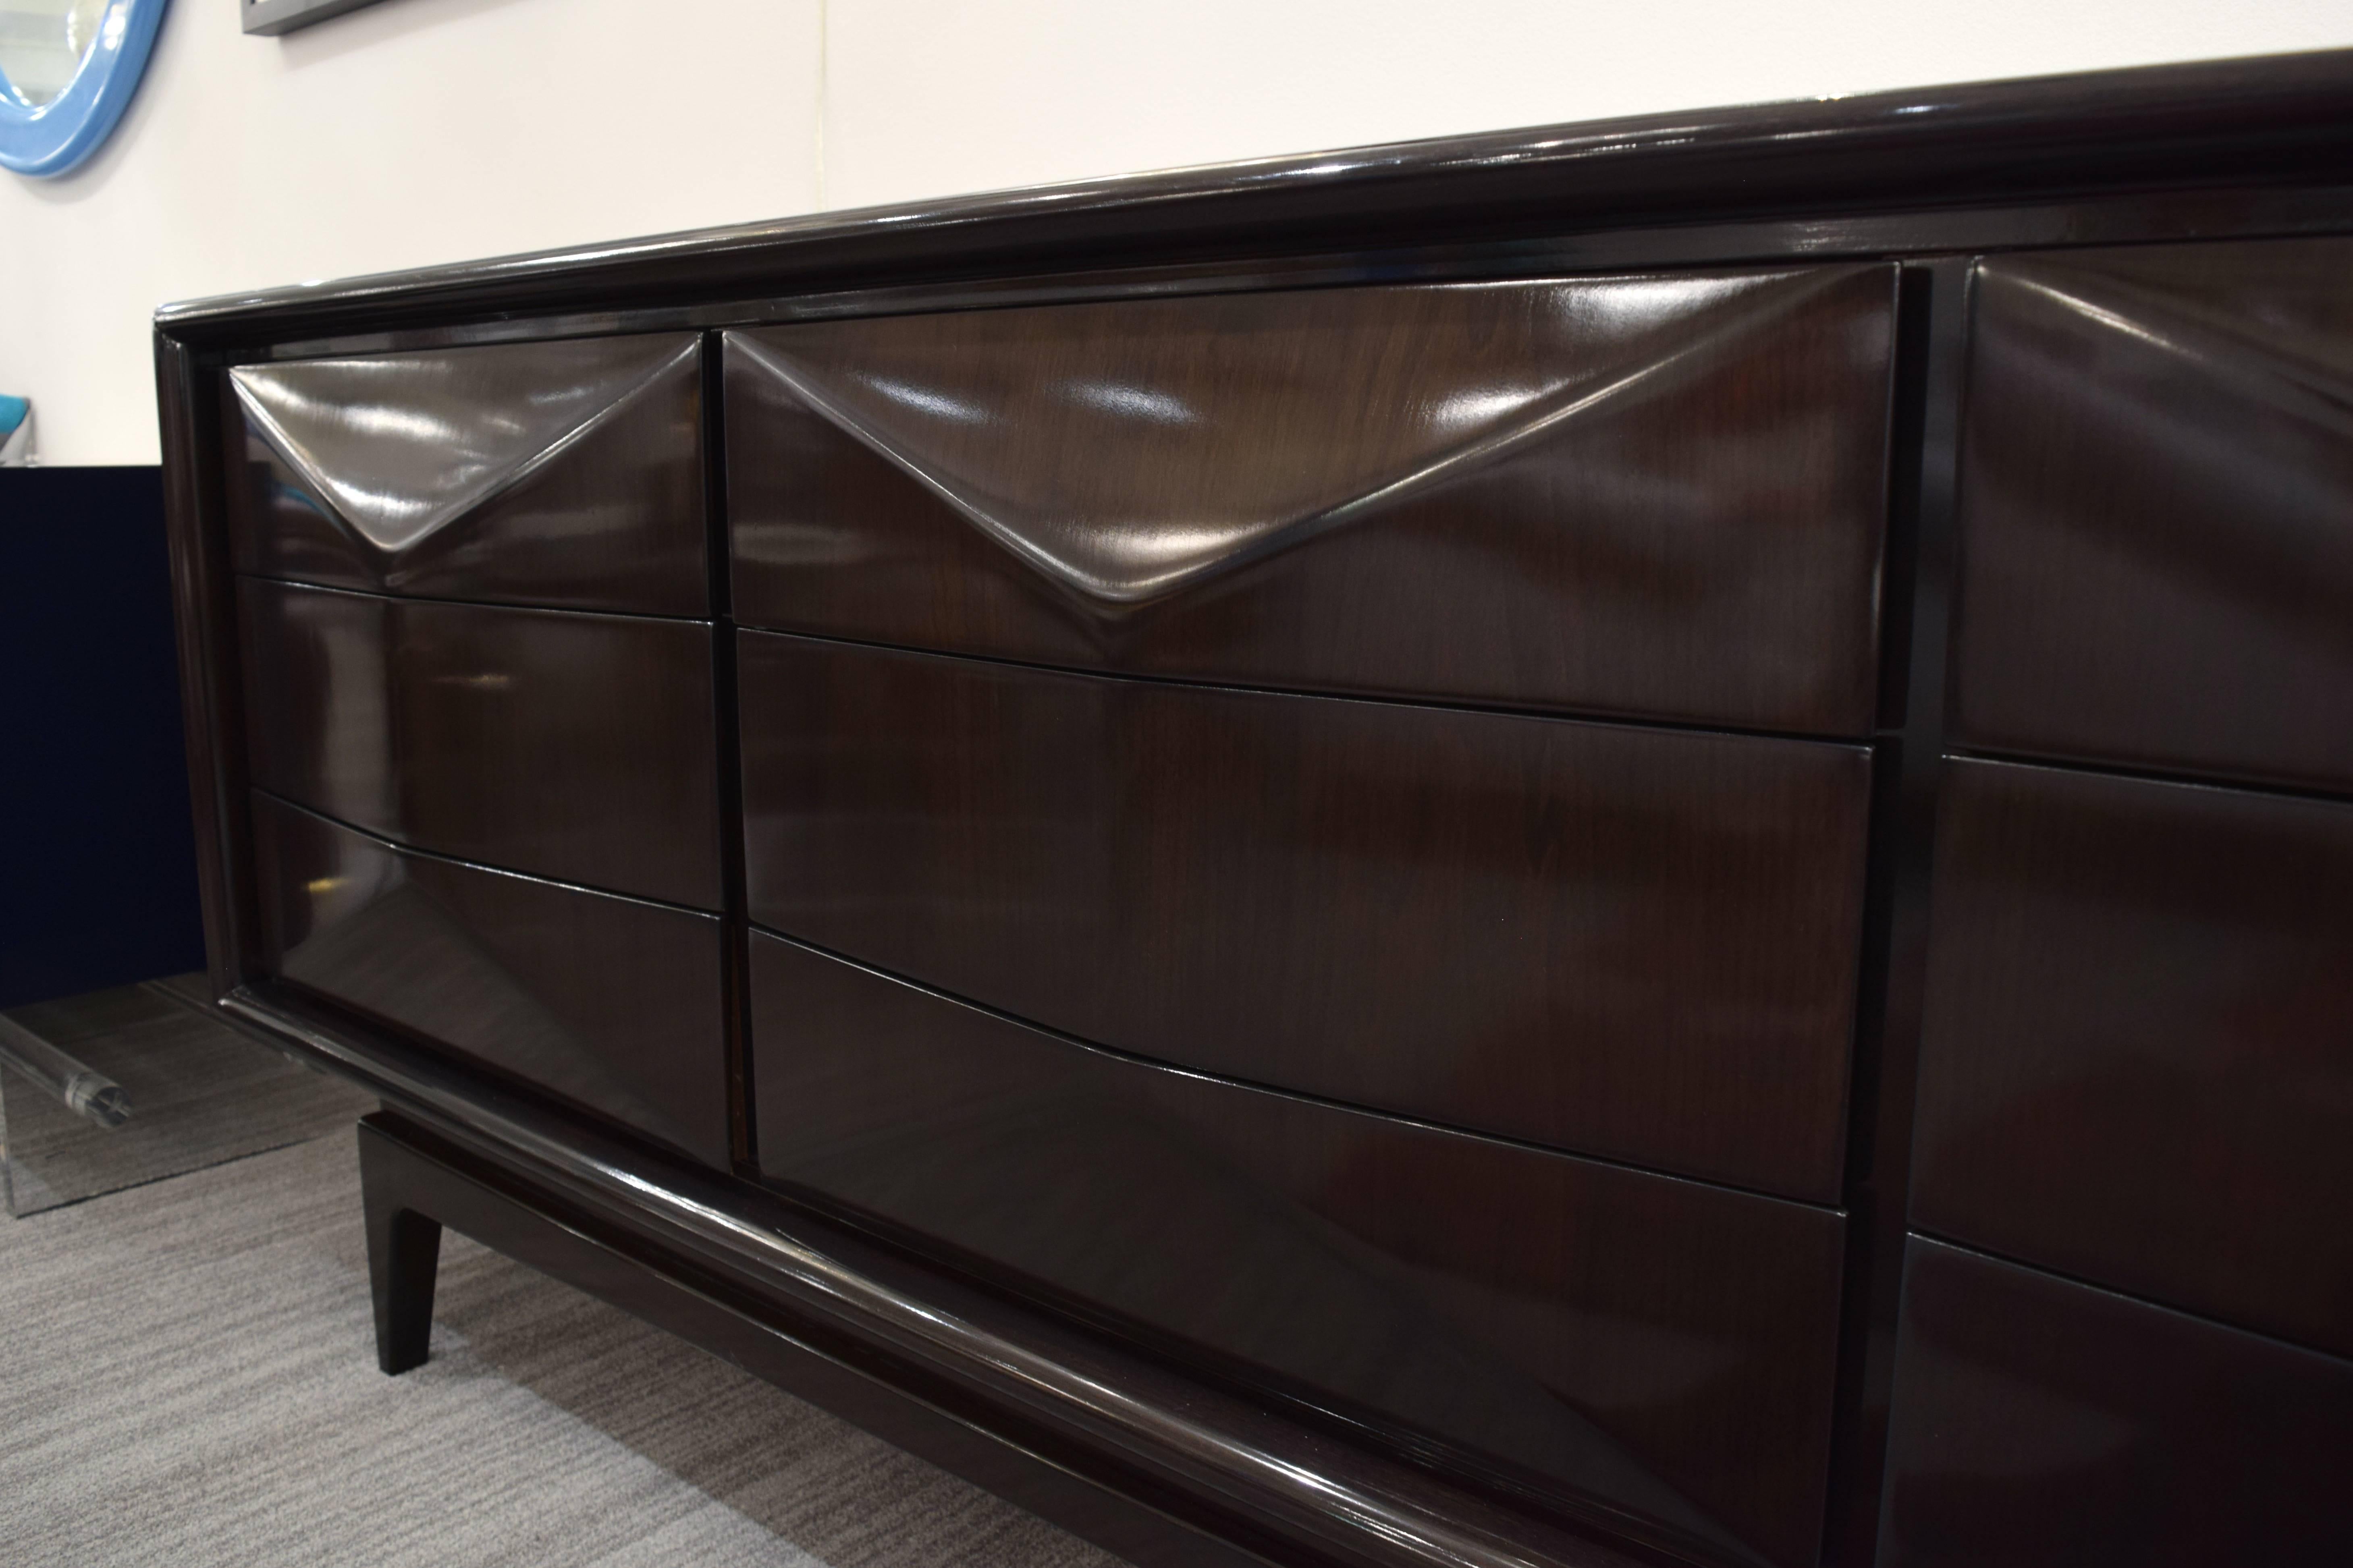 A Mid-Century Modern nine-drawer diamond front dresser, newly refinished in a high gloss lush chocolate finish.